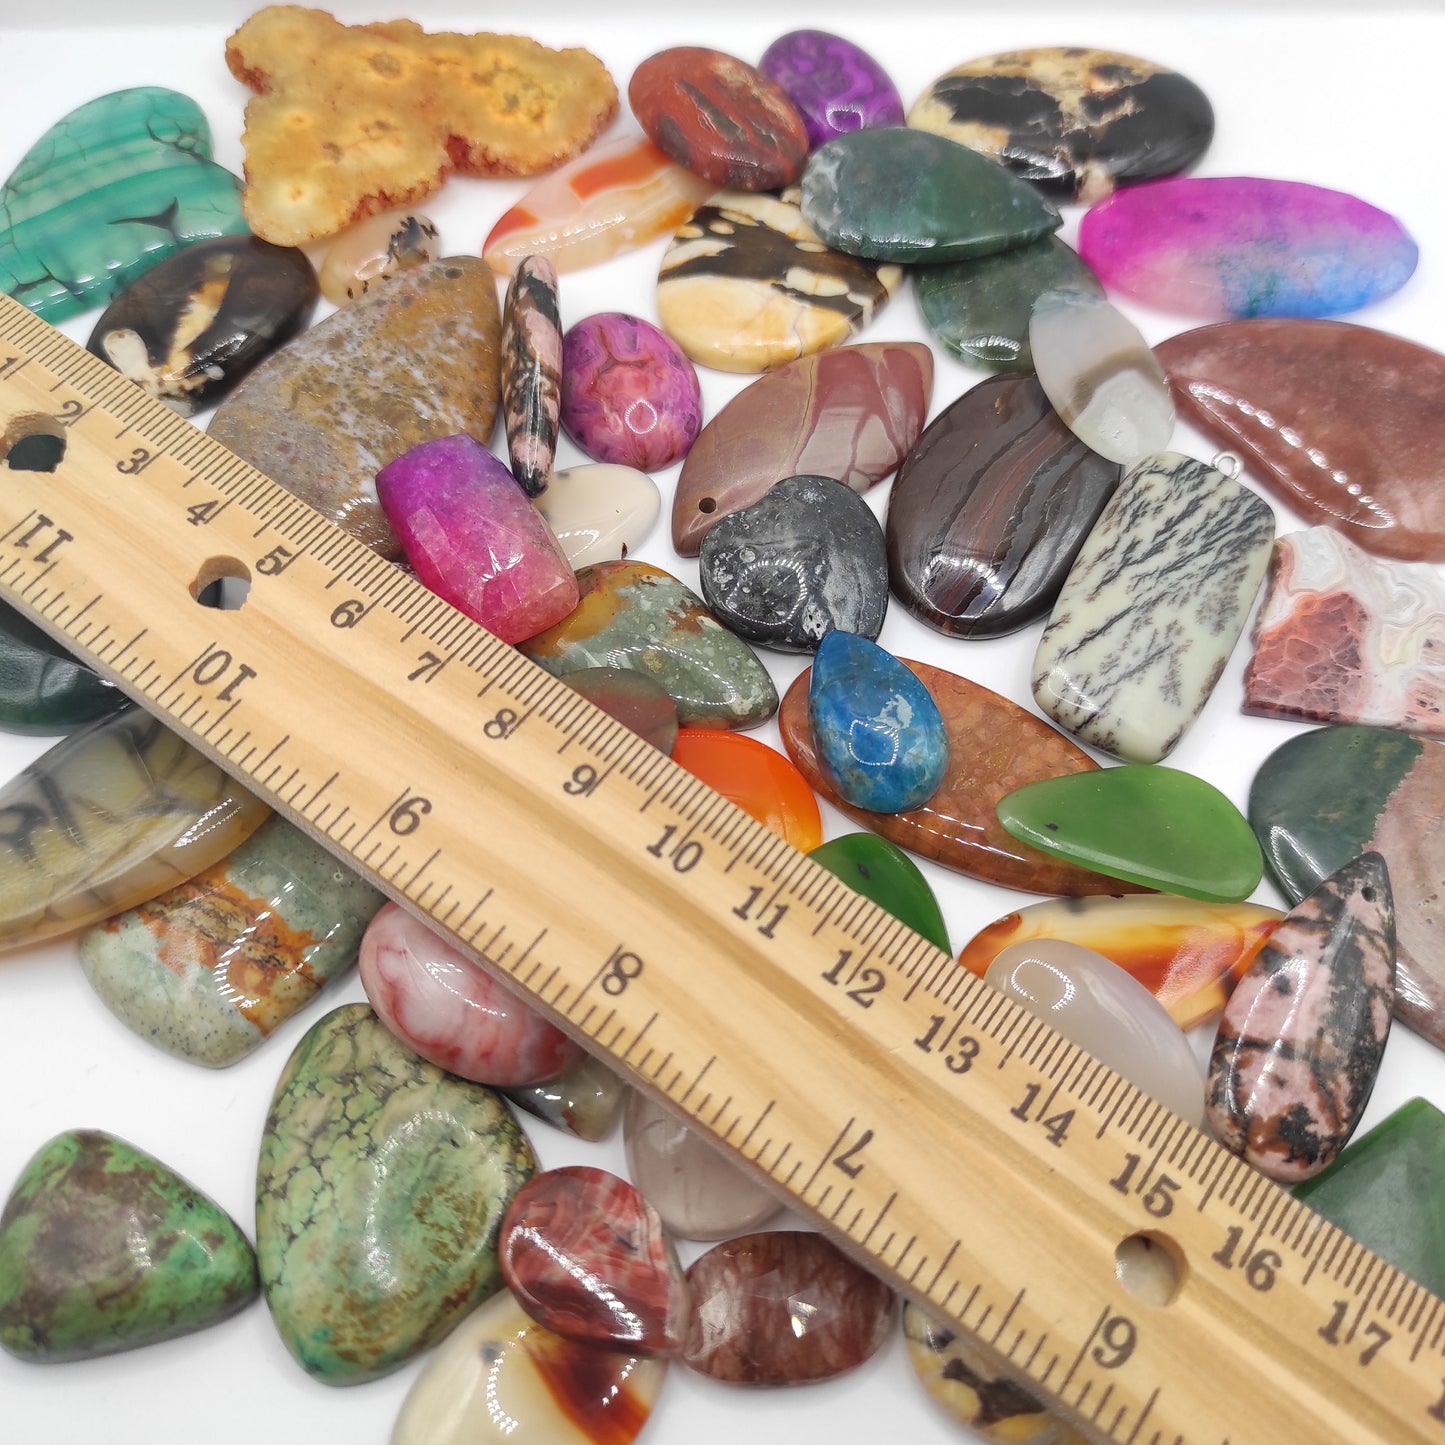 51pcs (370g) Mixed Cabochon Lot! Clearance Cabochon Mix - Oval Shaped - Fancy Shaped - Polished Cabochon Lots - Natural and Treated